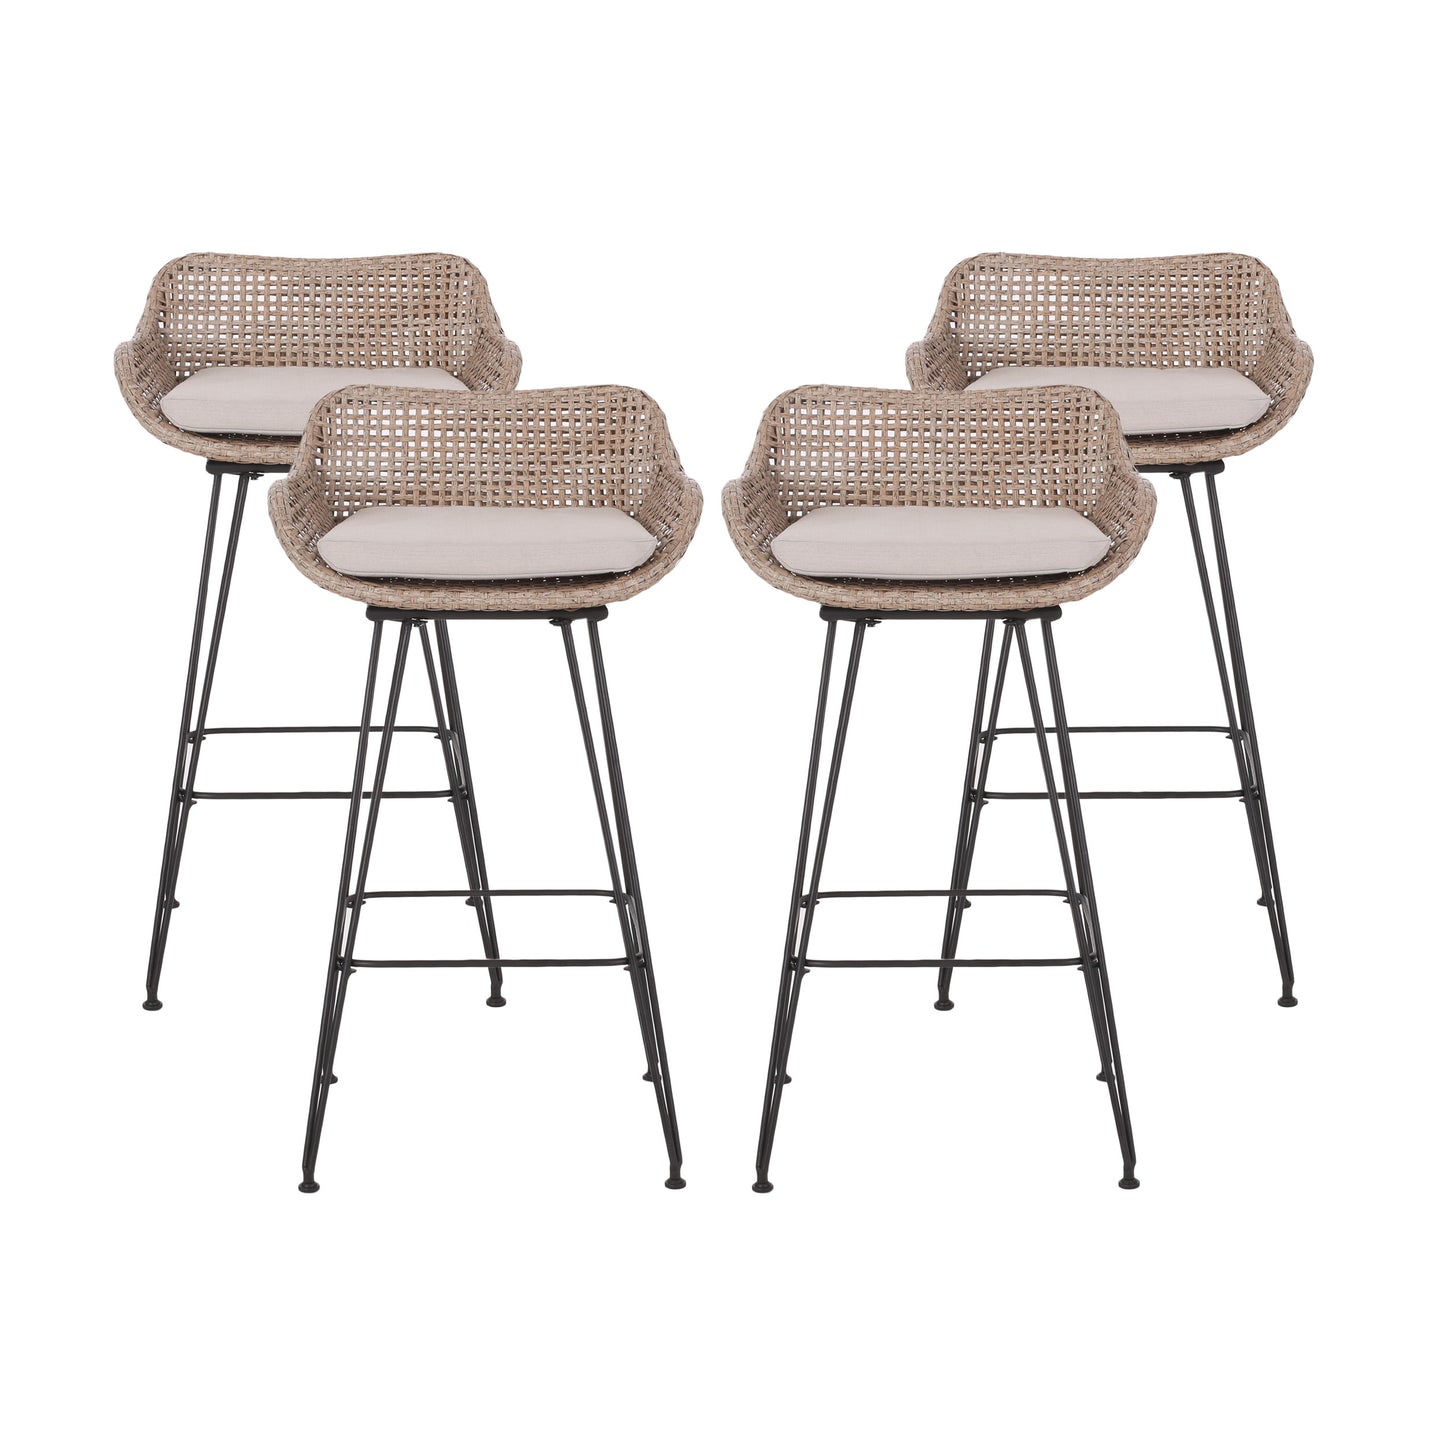 Pondway Outdoor Wicker and Iron Barstools with Cushion, Set of 4